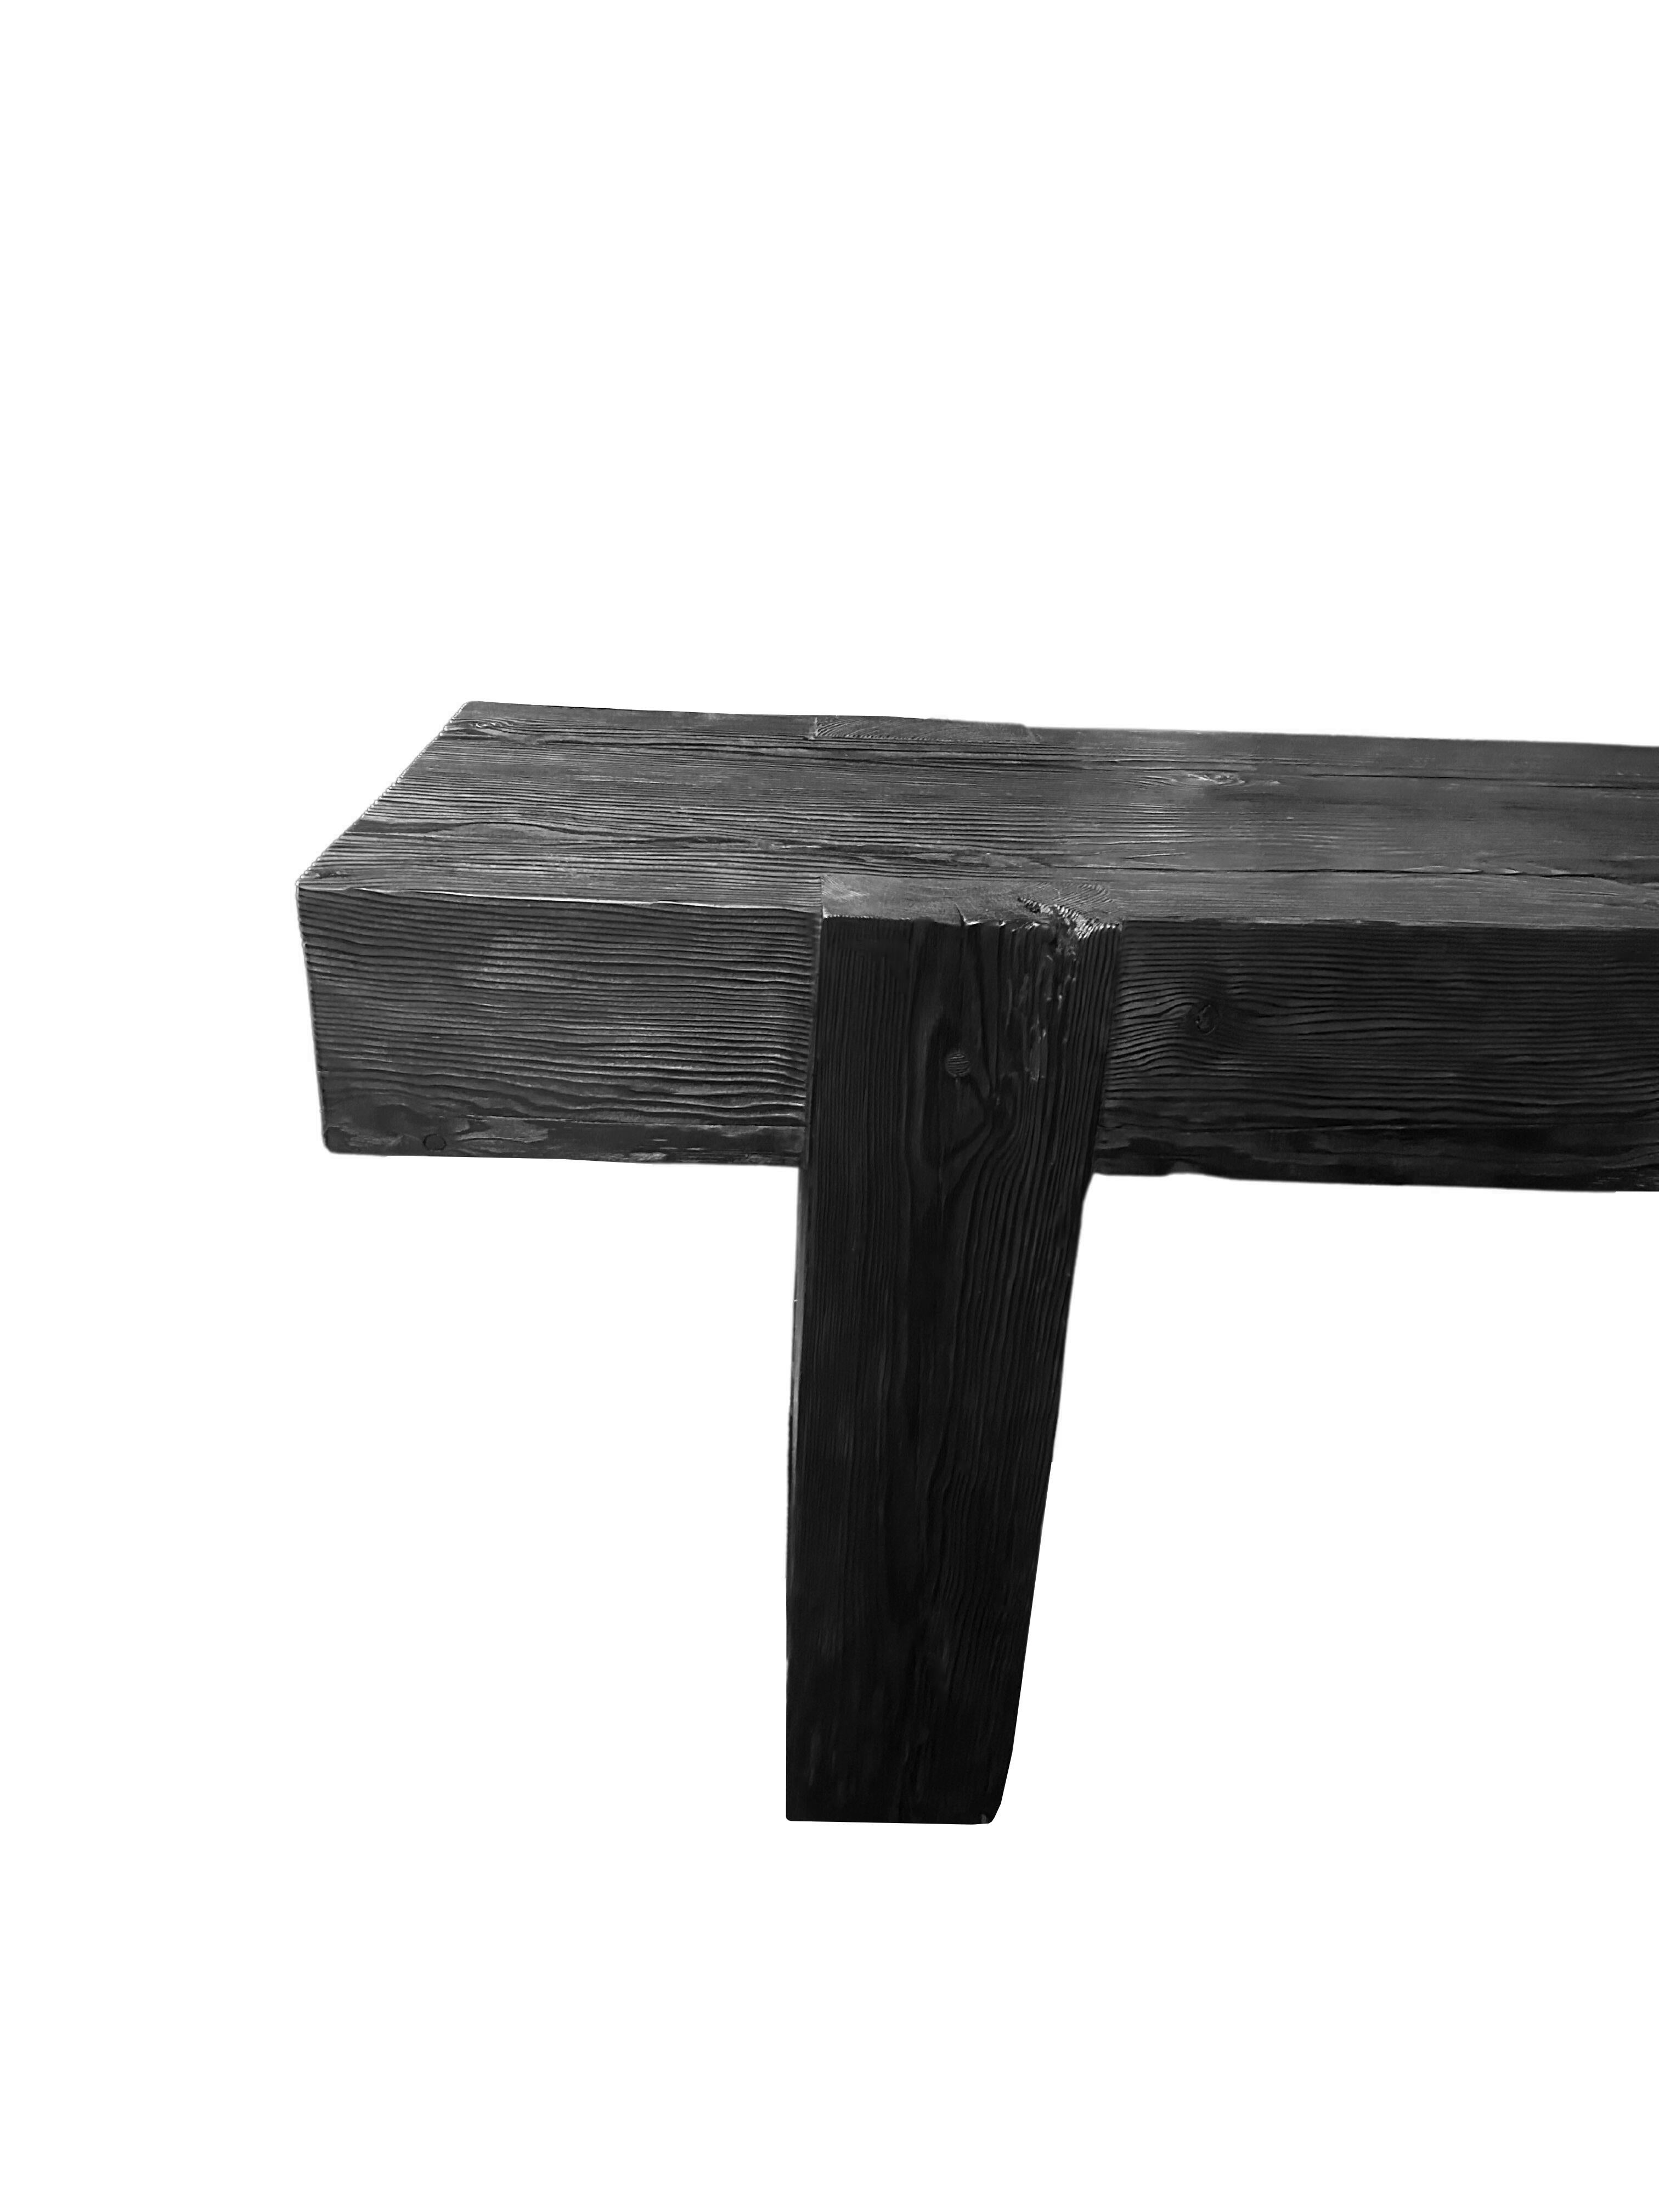 Other Solid Teak Wood Console Table, Burnt Finish Modern Organic For Sale